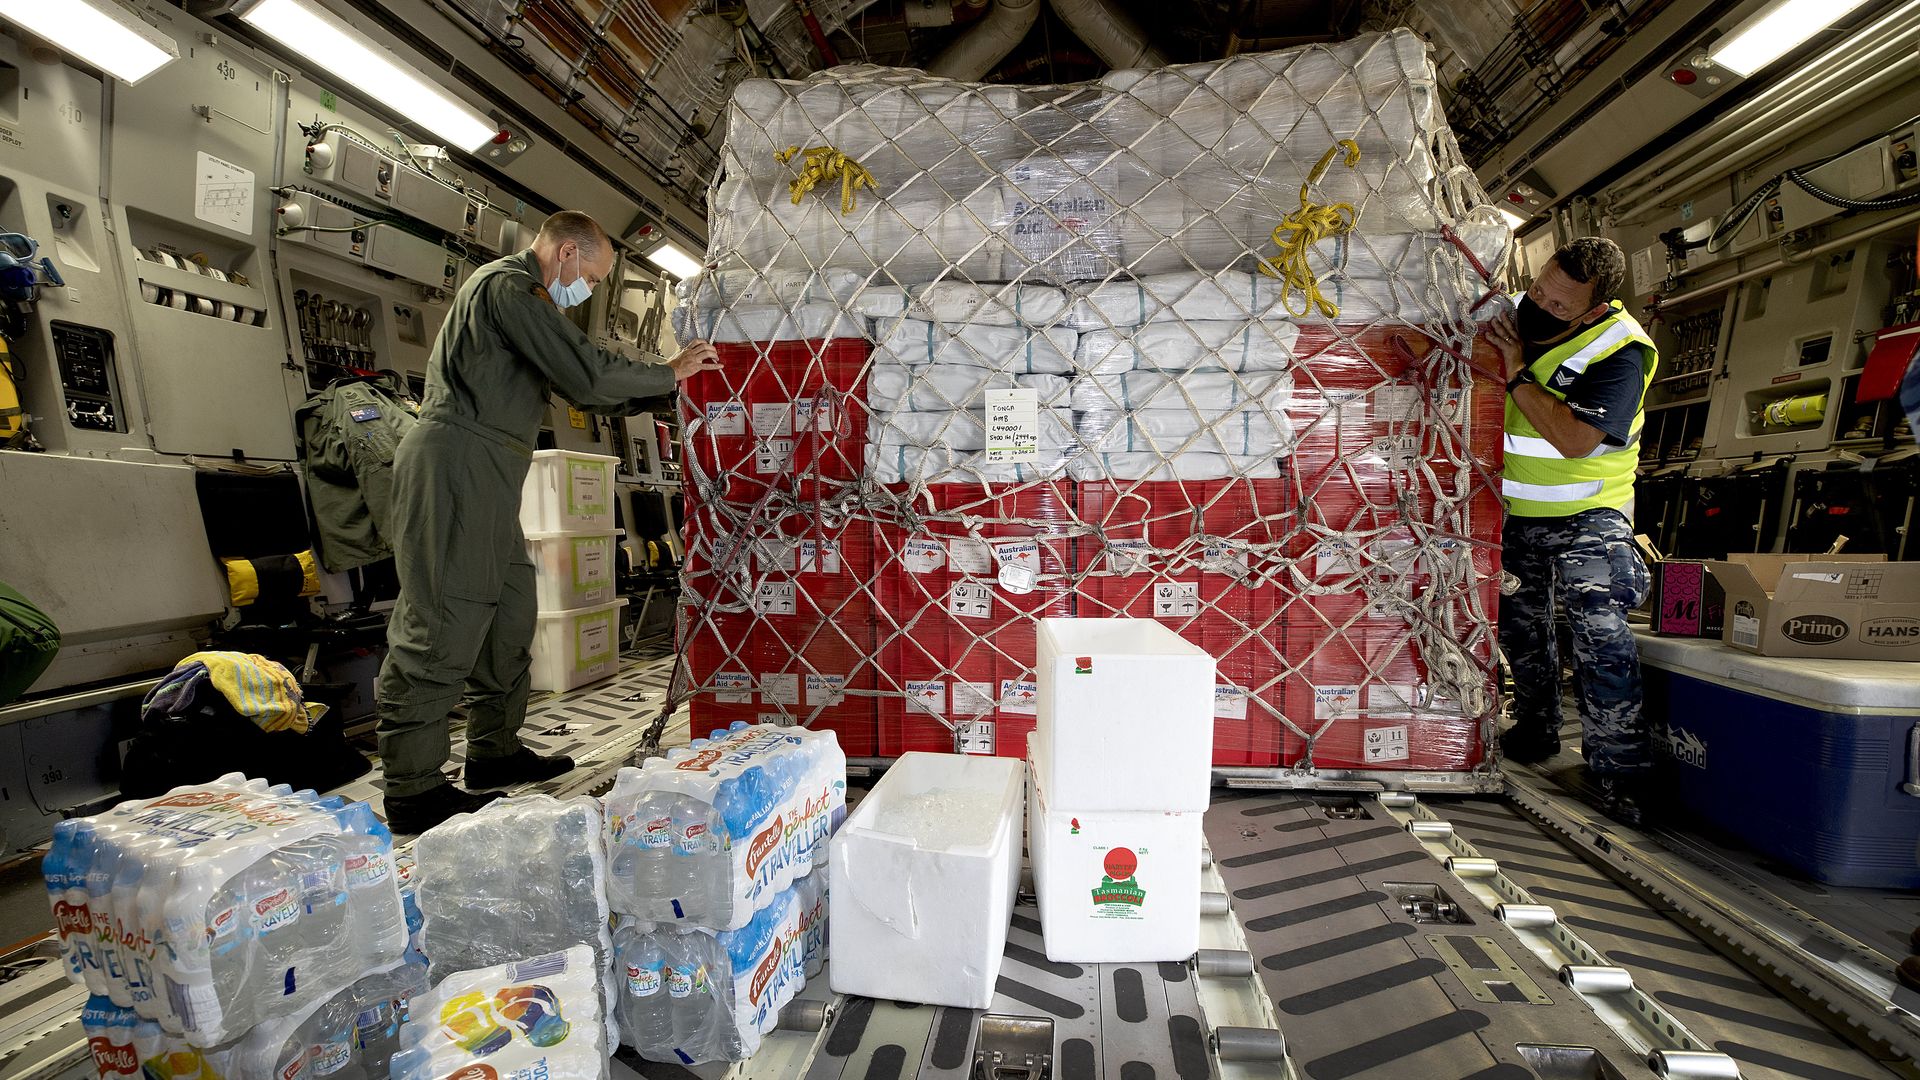 Air Force Load Master Corporal Dale Hall (L) helps secure humanitarian aid supplies aboard a Royal Australian Air Force C-17A Globemaster III aircraft.